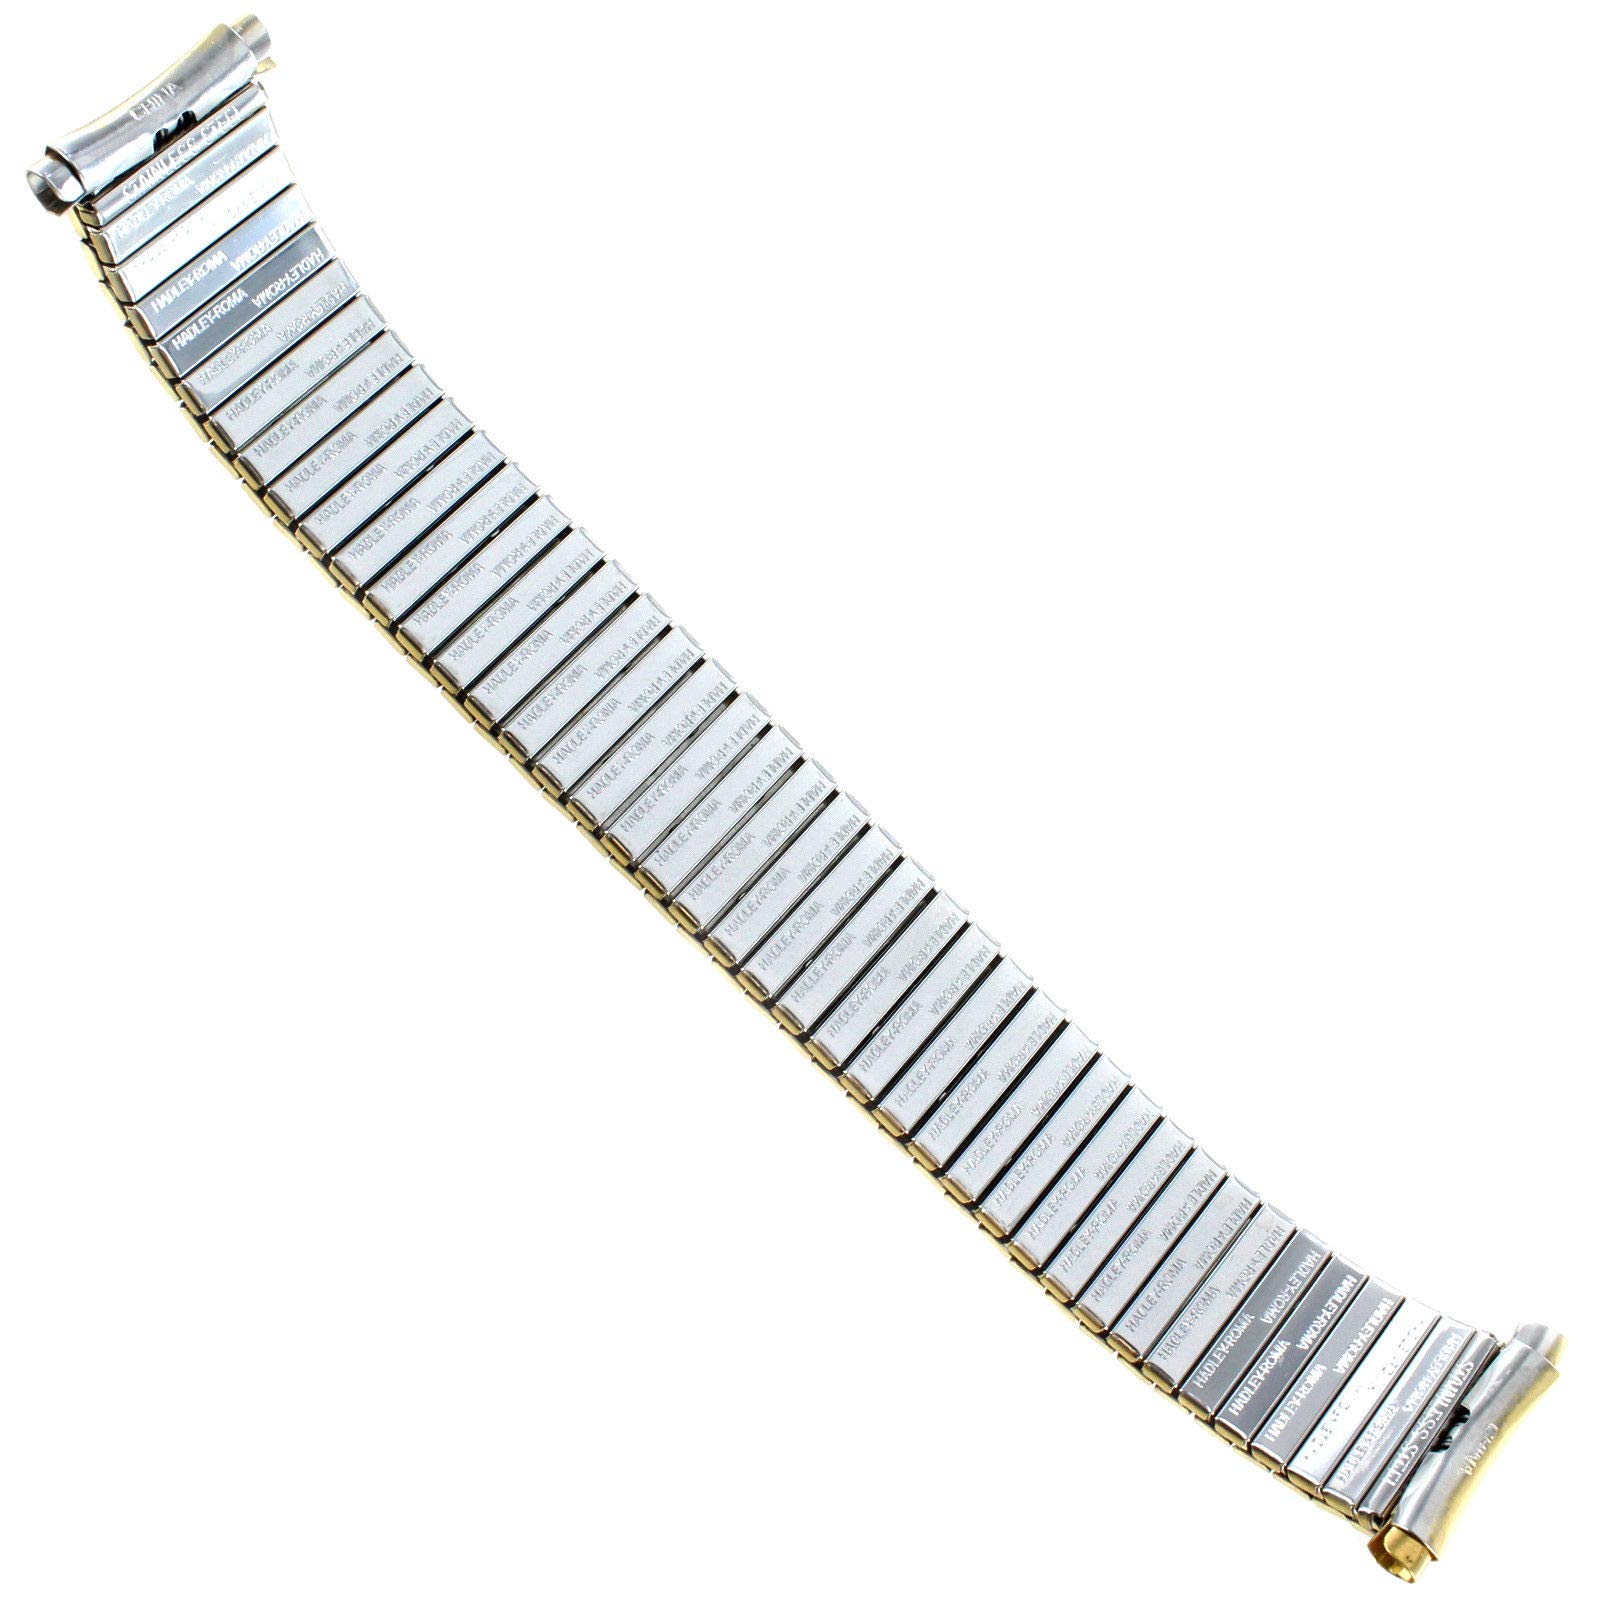 Milano Watchbands 18-21mm Hadley Roma IP Gold Plated Stainless Curved Mens Expansion Band 7725